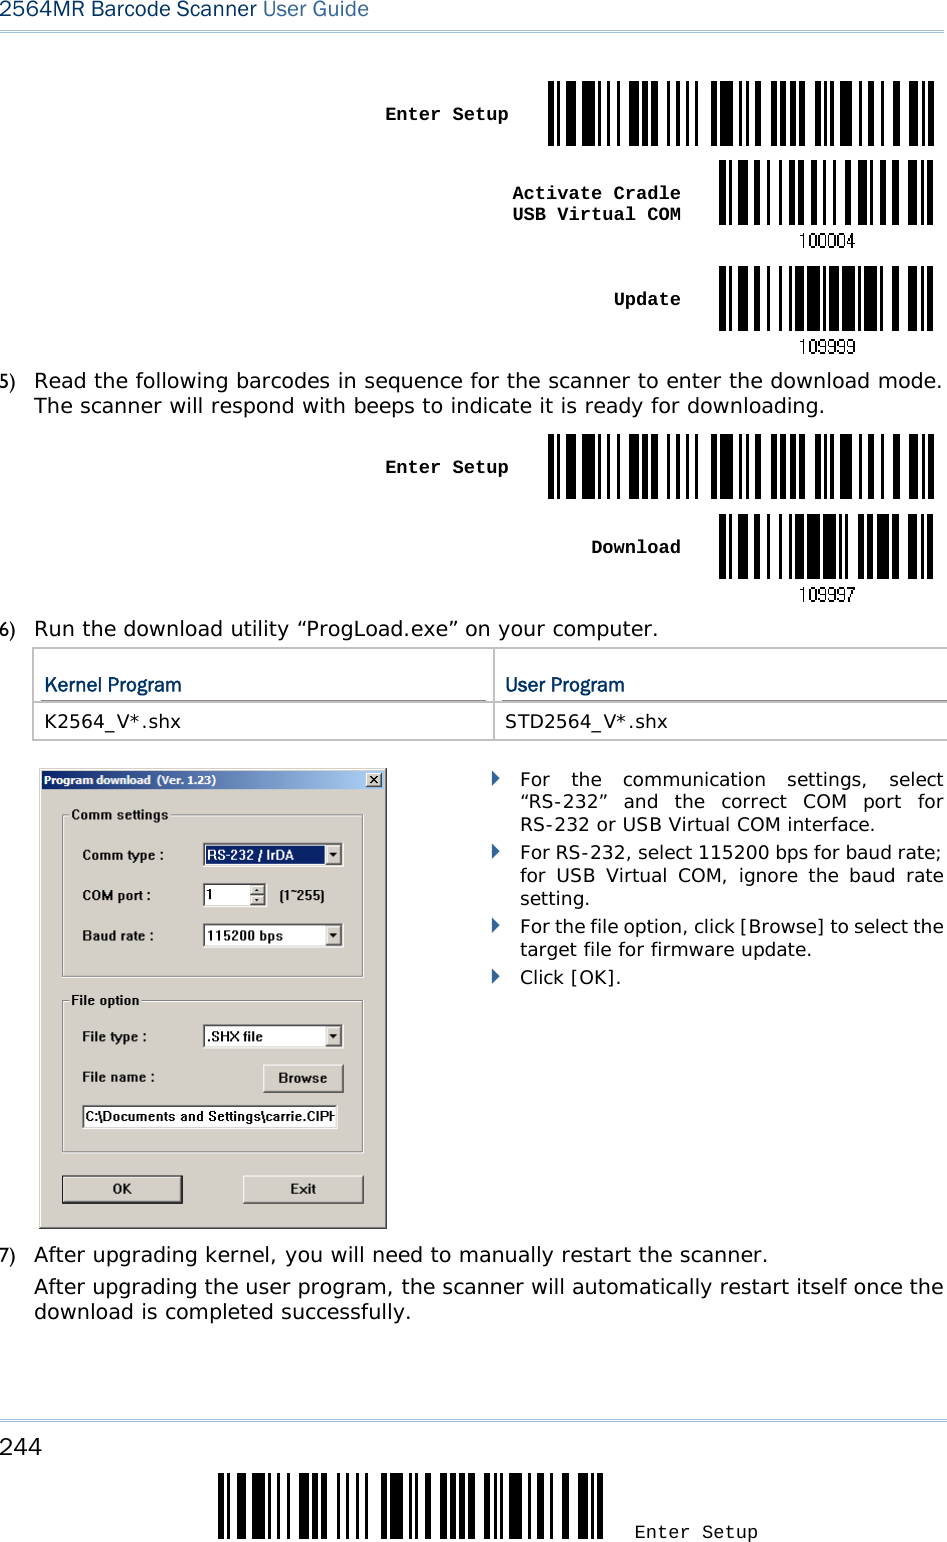 244 Enter Setup 2564MR Barcode Scanner User Guide   Enter Setup Activate Cradle  USB Virtual COM Update5) Read the following barcodes in sequence for the scanner to enter the download mode. The scanner will respond with beeps to indicate it is ready for downloading.  Enter Setup Download6) Run the download utility “ProgLoad.exe” on your computer.  Kernel Program  User Program K2564_V*.shx STD2564_V*.shx         For the communication settings, select “RS-232” and the correct COM port for RS-232 or USB Virtual COM interface.  For RS-232, select 115200 bps for baud rate; for USB Virtual COM, ignore the baud rate setting.  For the file option, click [Browse] to select the target file for firmware update.   Click [OK]. 7) After upgrading kernel, you will need to manually restart the scanner.      After upgrading the user program, the scanner will automatically restart itself once the download is completed successfully.  